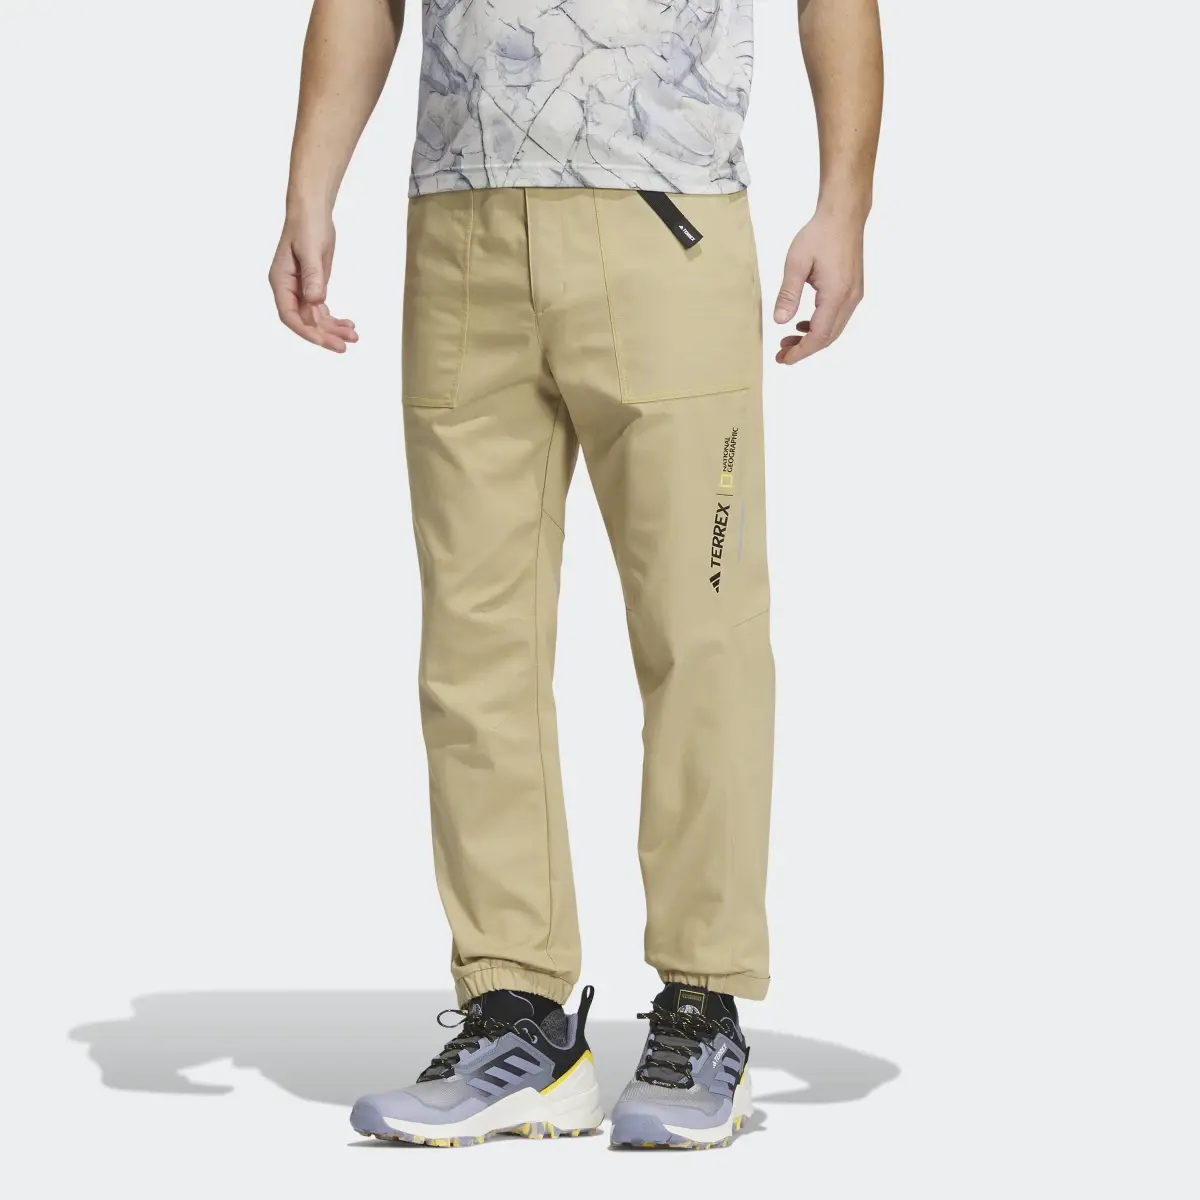 Adidas National Geographic Twill Trousers. 1